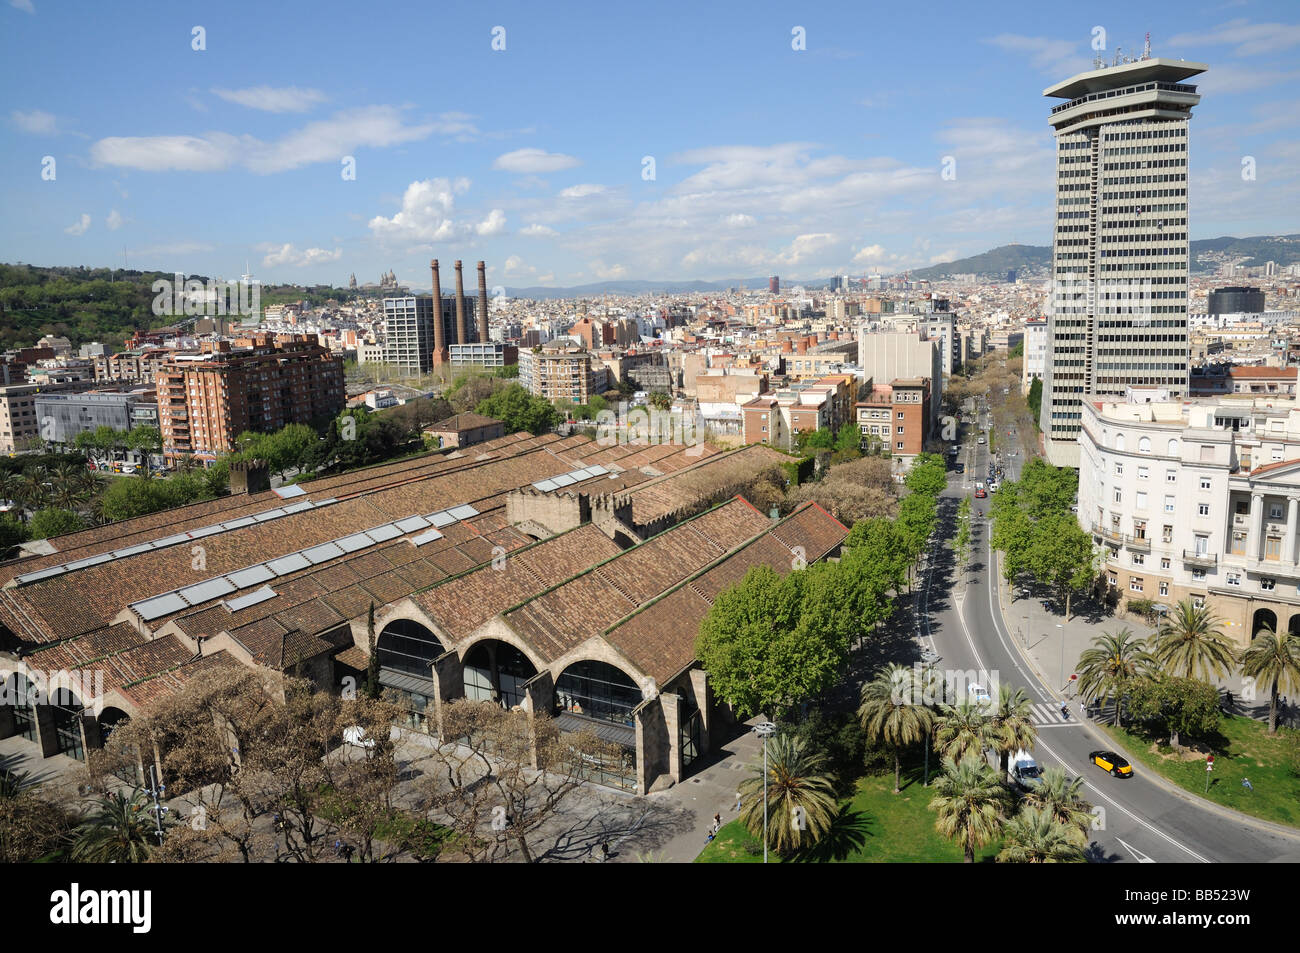 Aerial view over El Raval district in Barcelona Spain Stock Photo